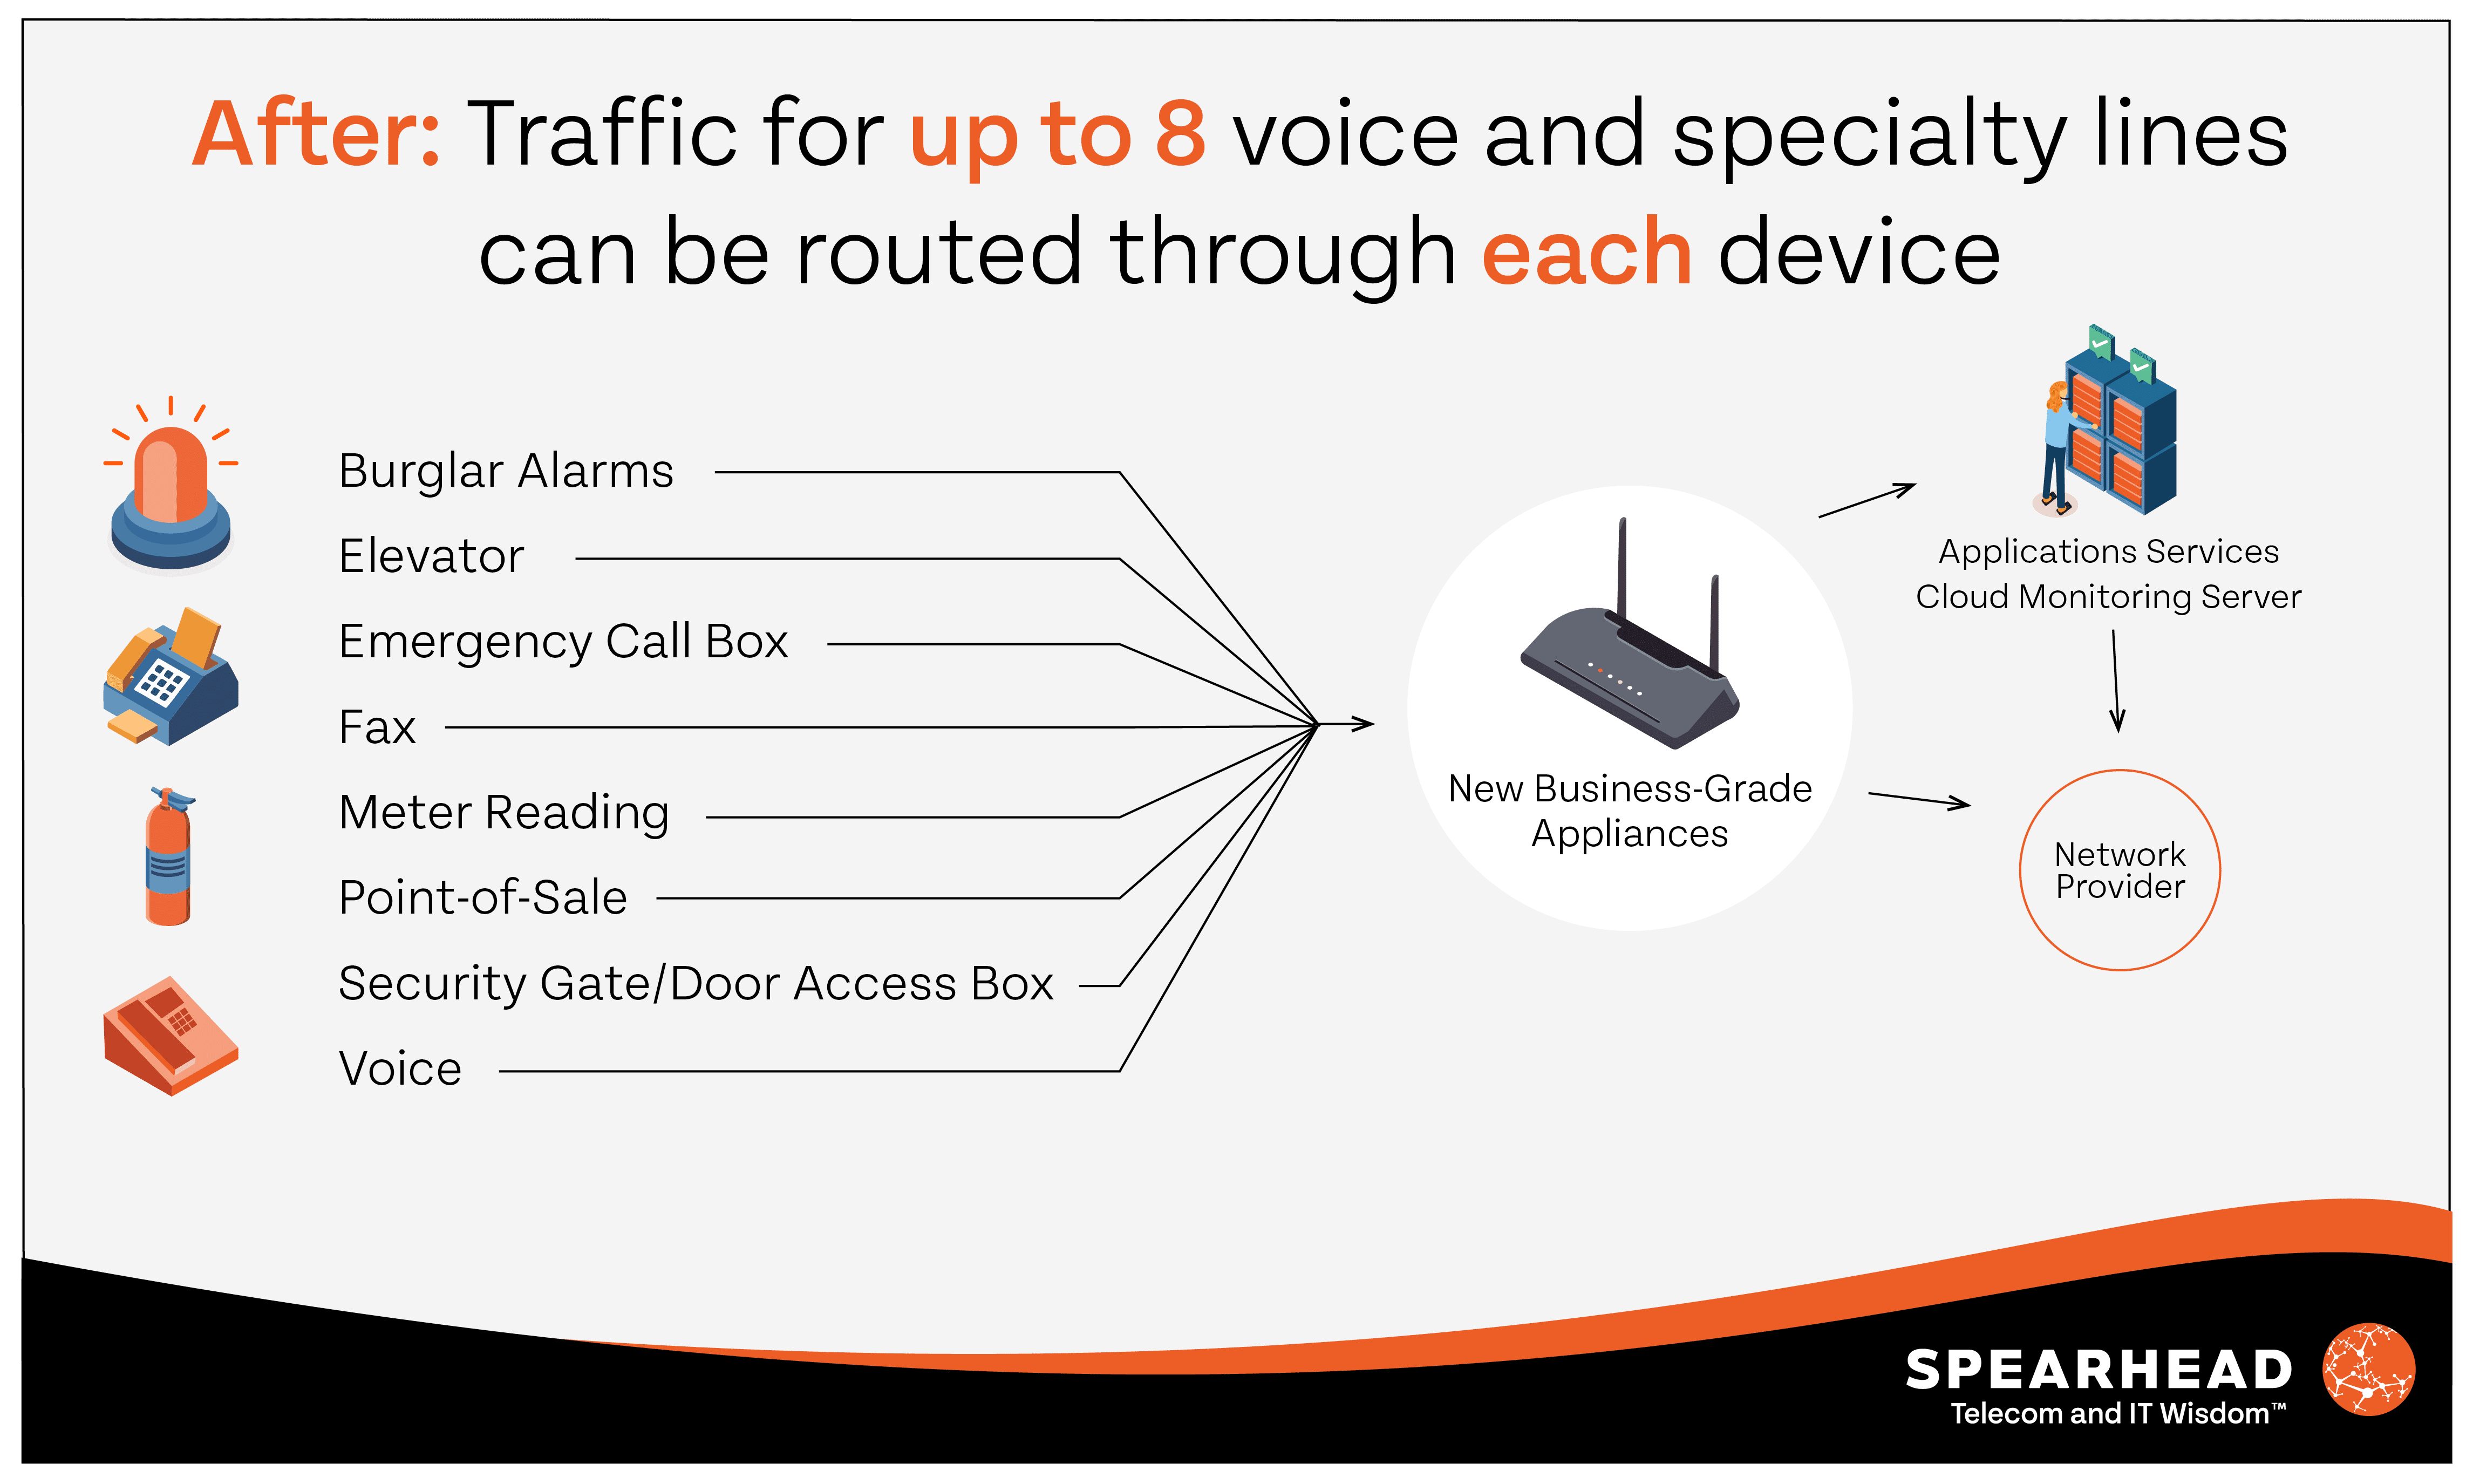 Graphic showing what new technologies can do for POTS lines and how up to 8 voice and specialty lines can be routed through new devices 